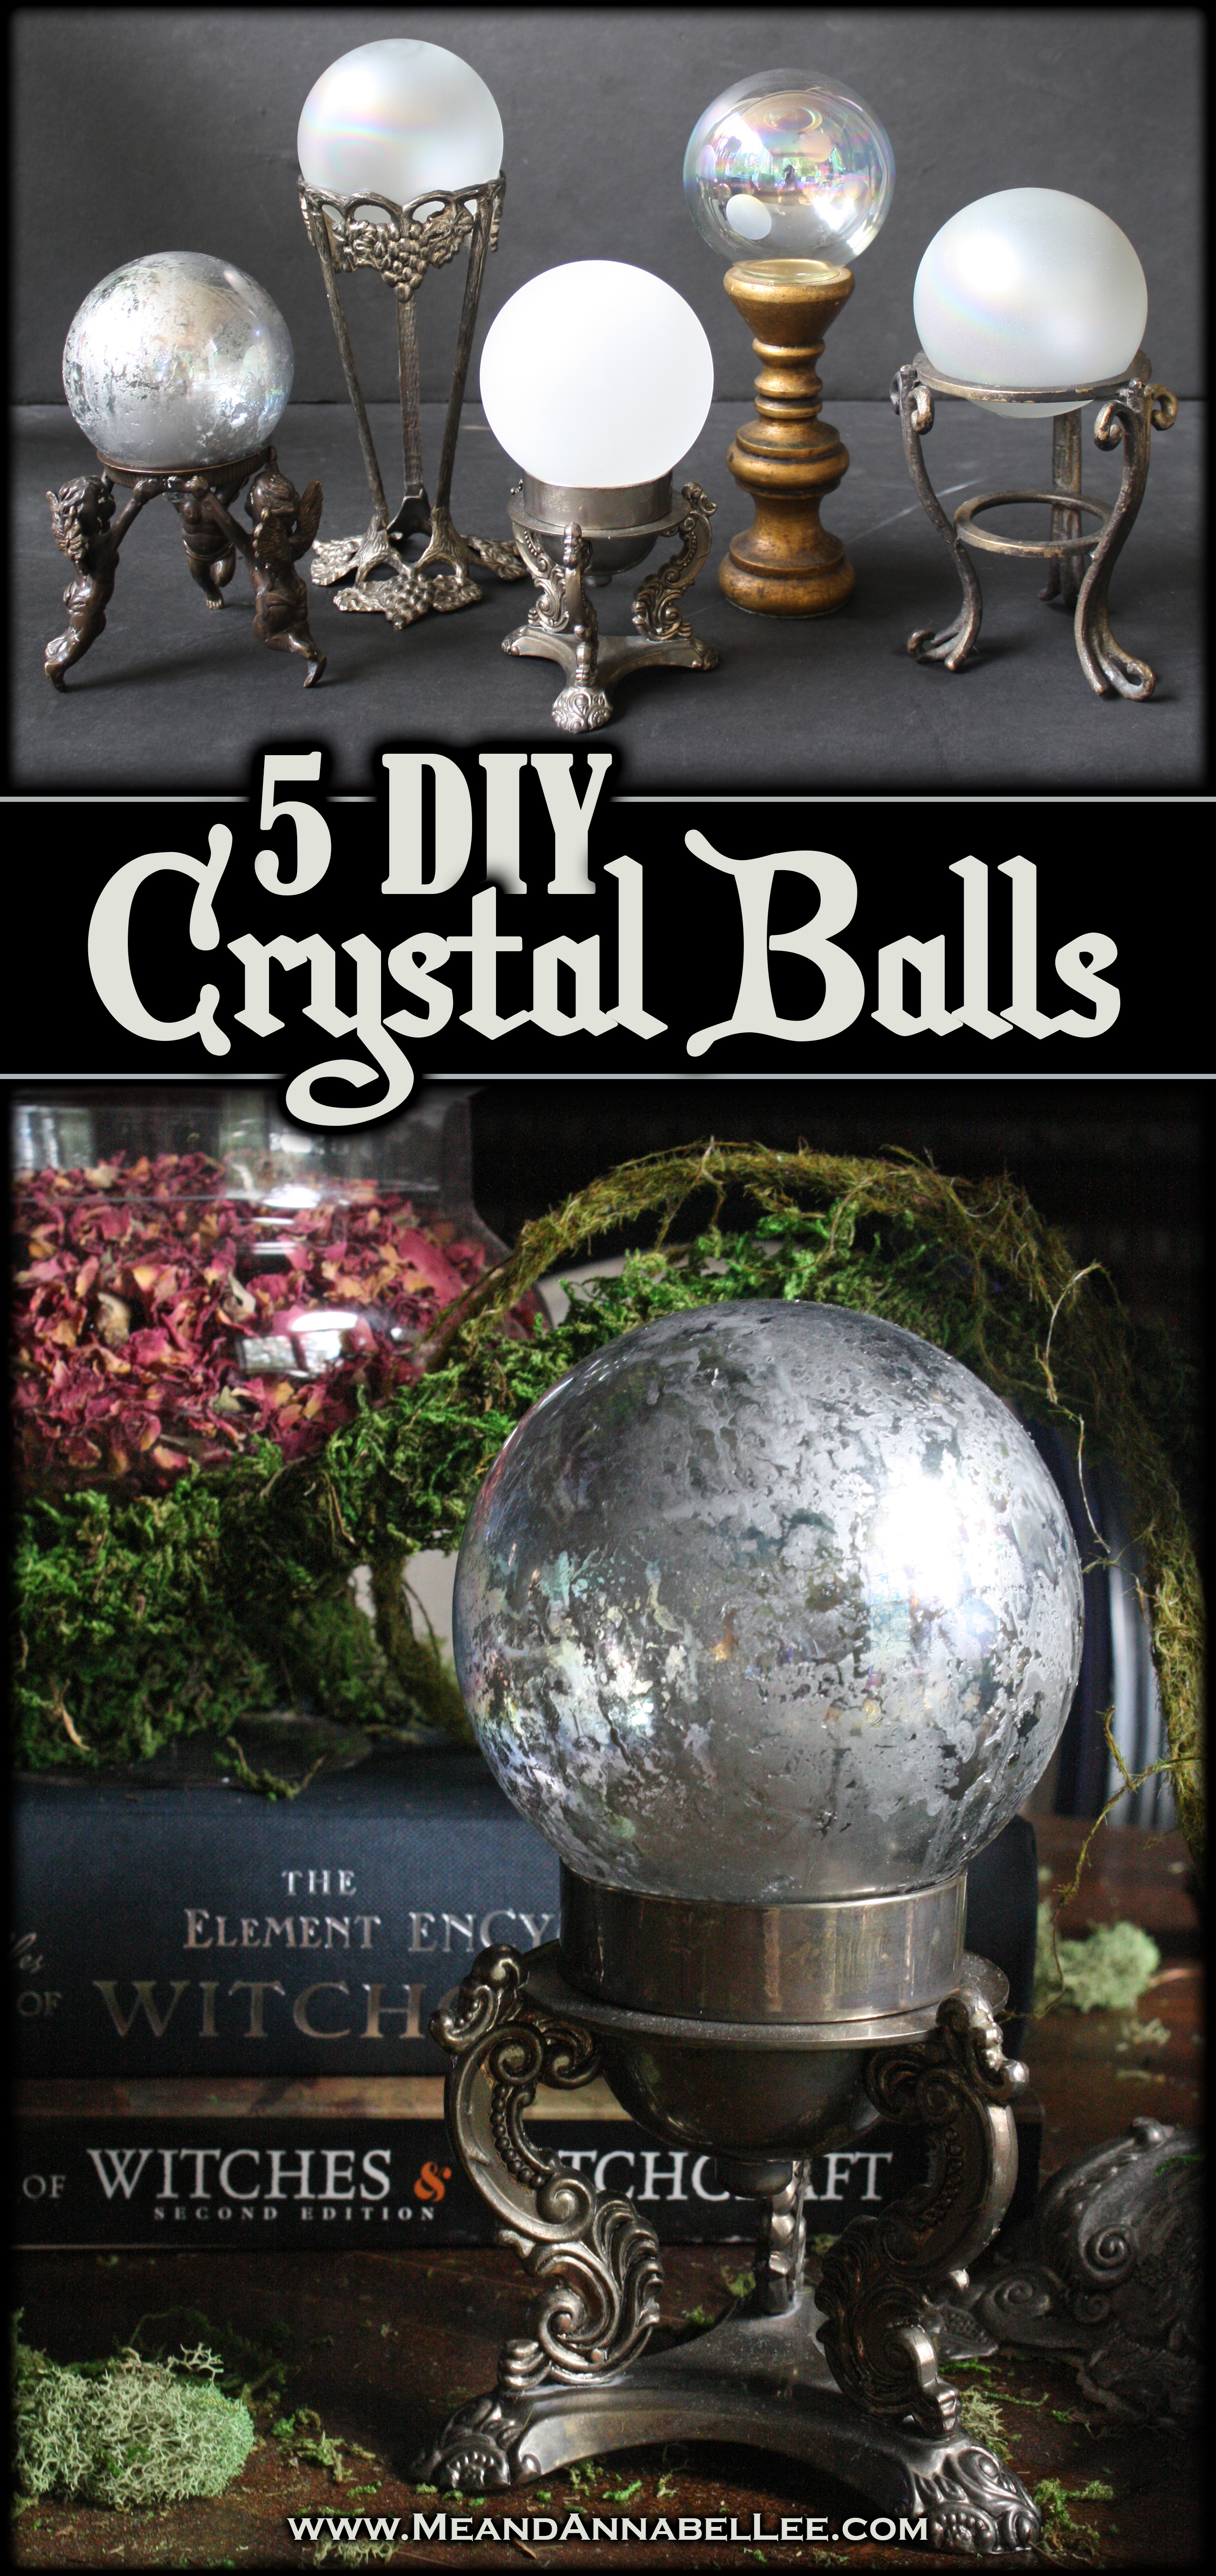 5 Easy Ideas for DIY Crystal Balls | Halloween Crafts and Decorations | Witches Dinner Party Table Setting | Frosted Glass and Faux Mercury Glass Tutorials | Pagan Fortune Telling | Gazing Balls |www.MeandAnnabelLee.com